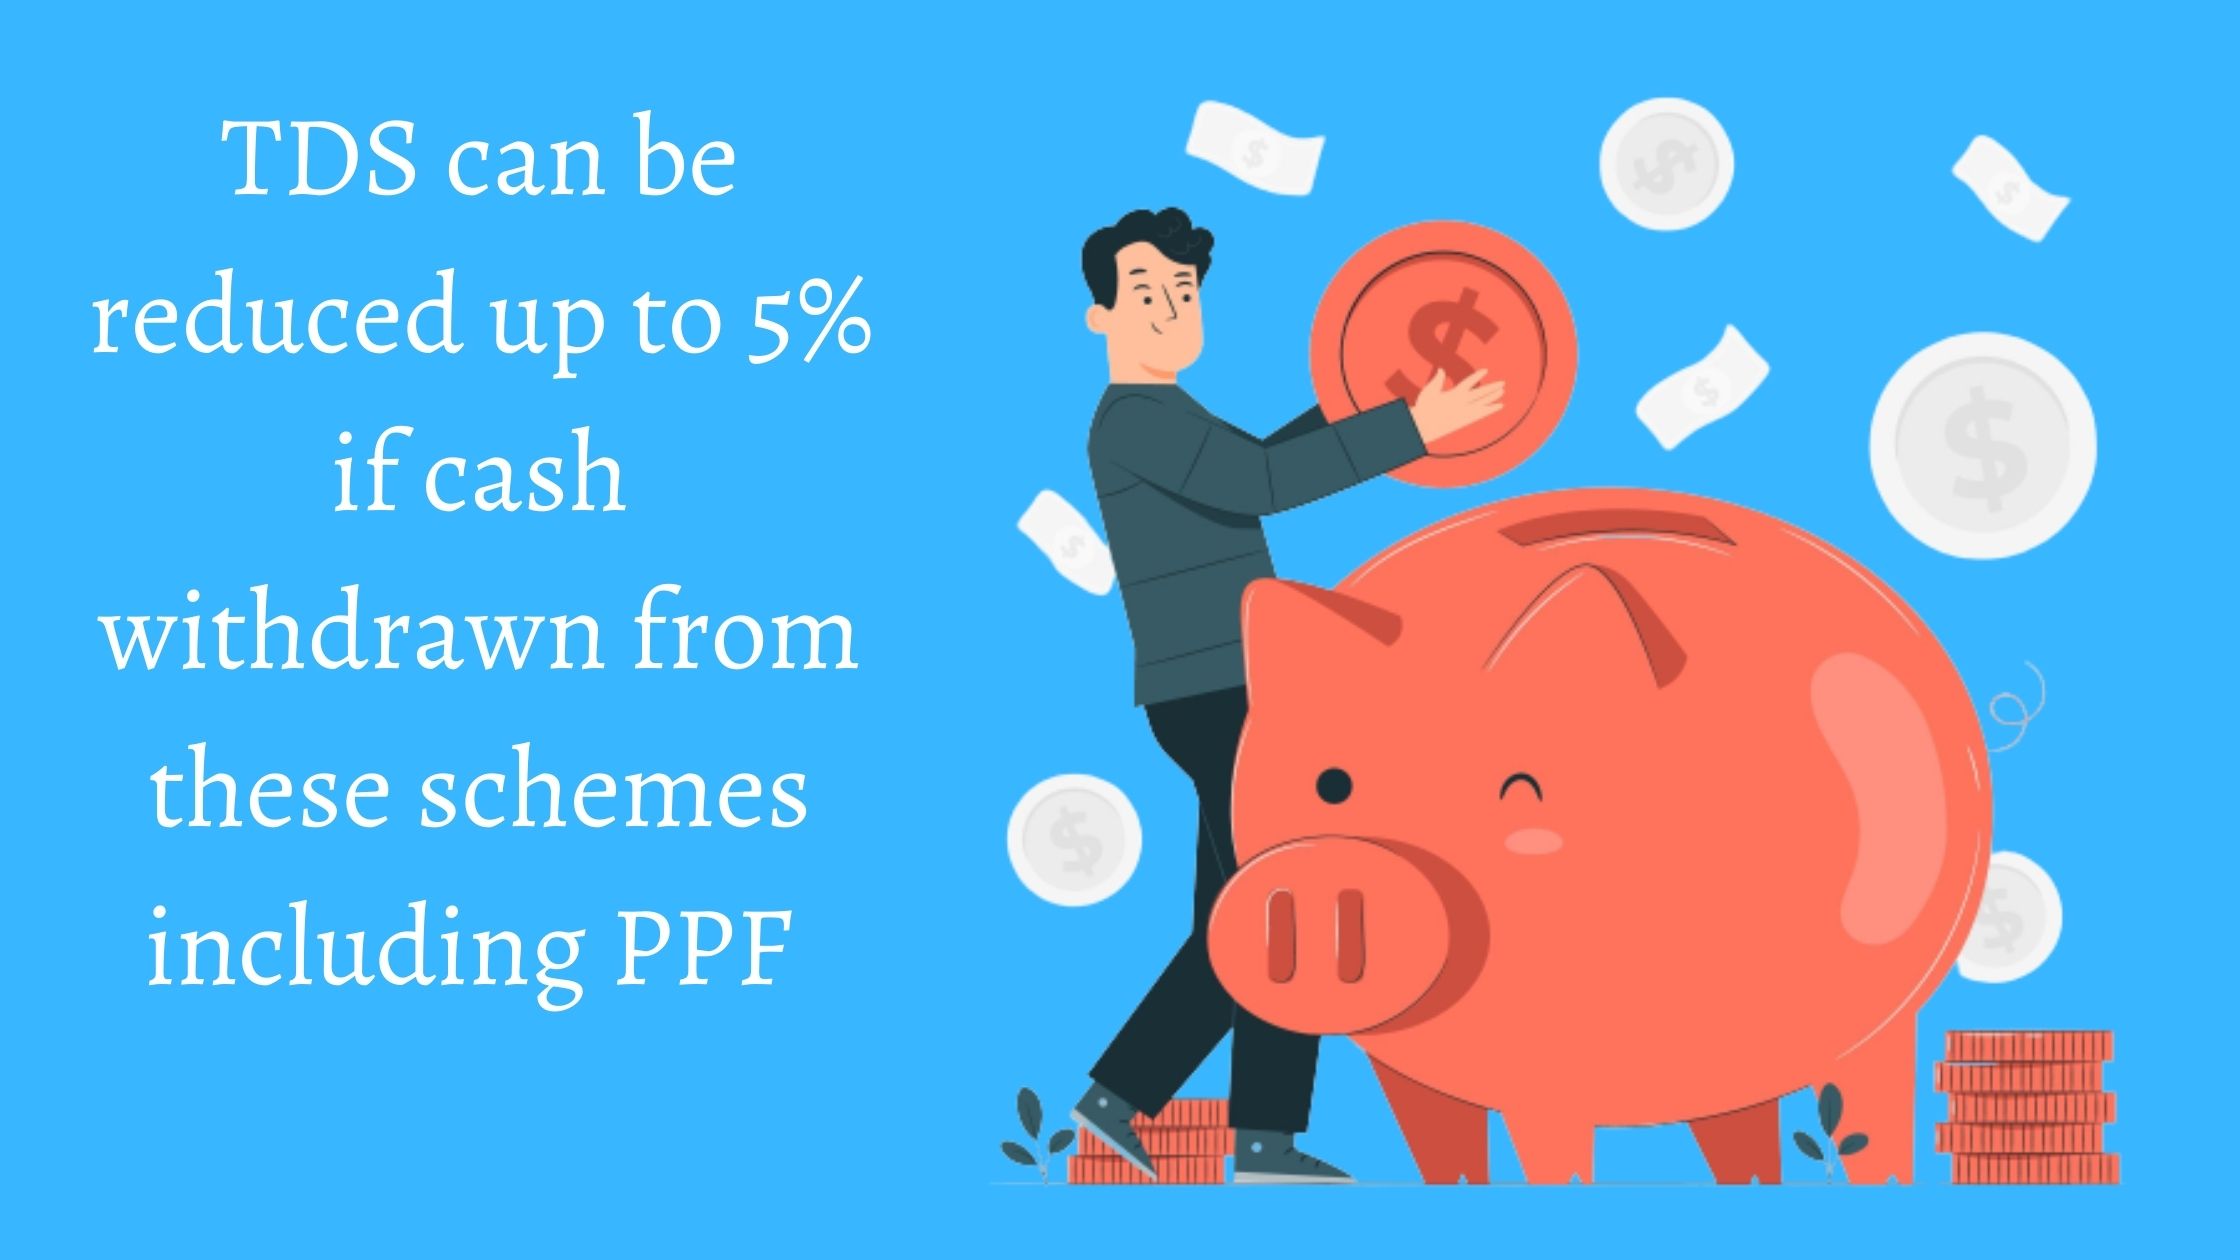 TDS can be reduced up to 5% if cash withdrawn from these schemes including PPF